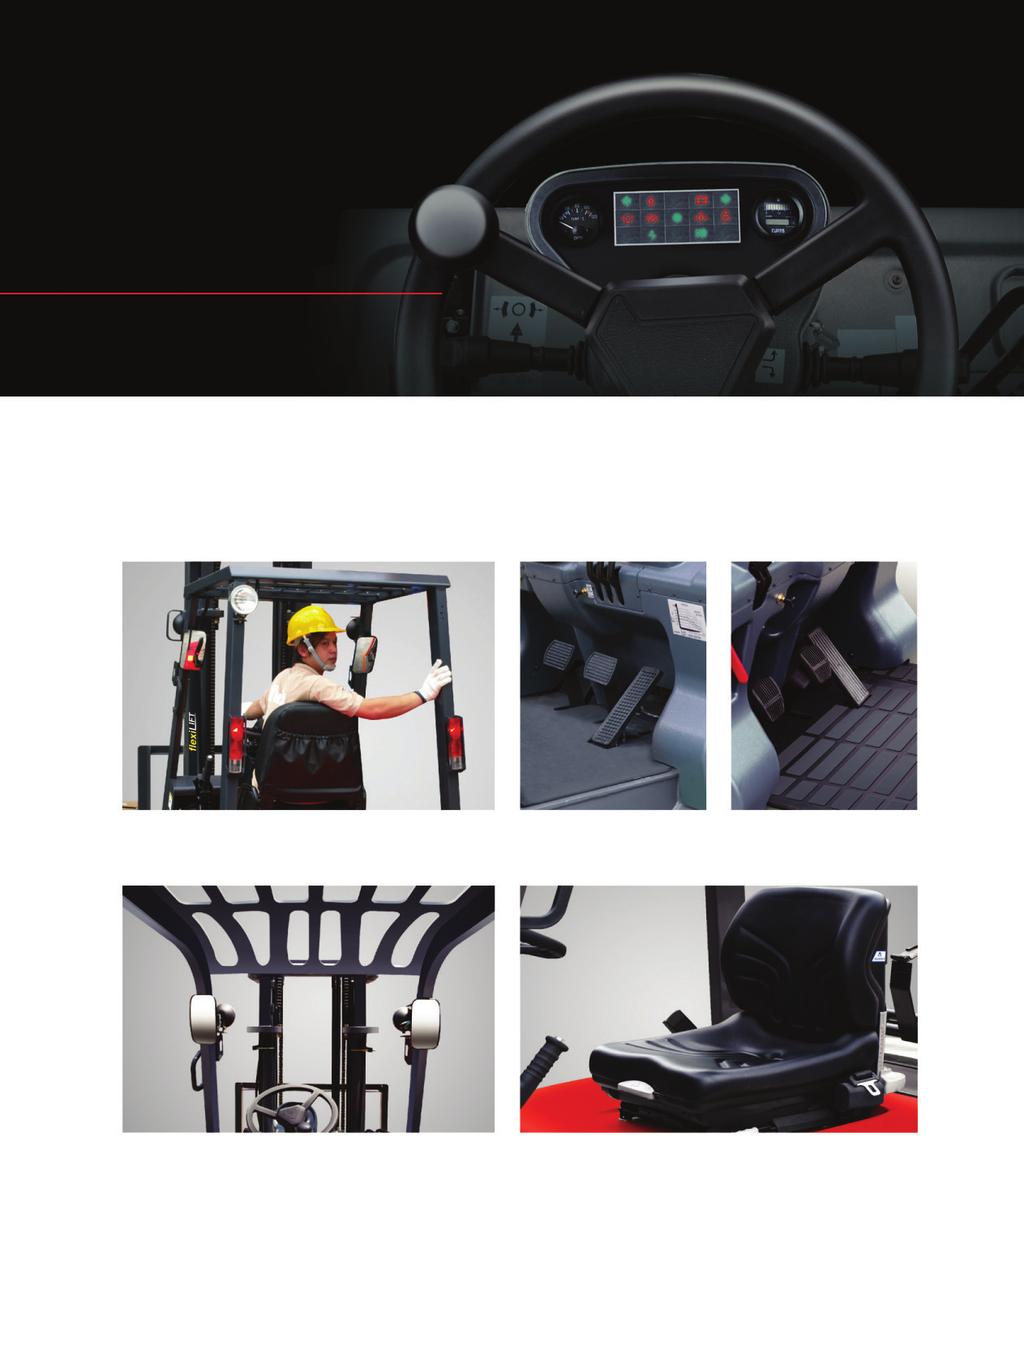 Backward visibility New Front Cowl Large Foot Space Forward visibility Deluxe suspension seat (optional) The Grammer suspension seat delivers the best in operator comfort, posture and performance.